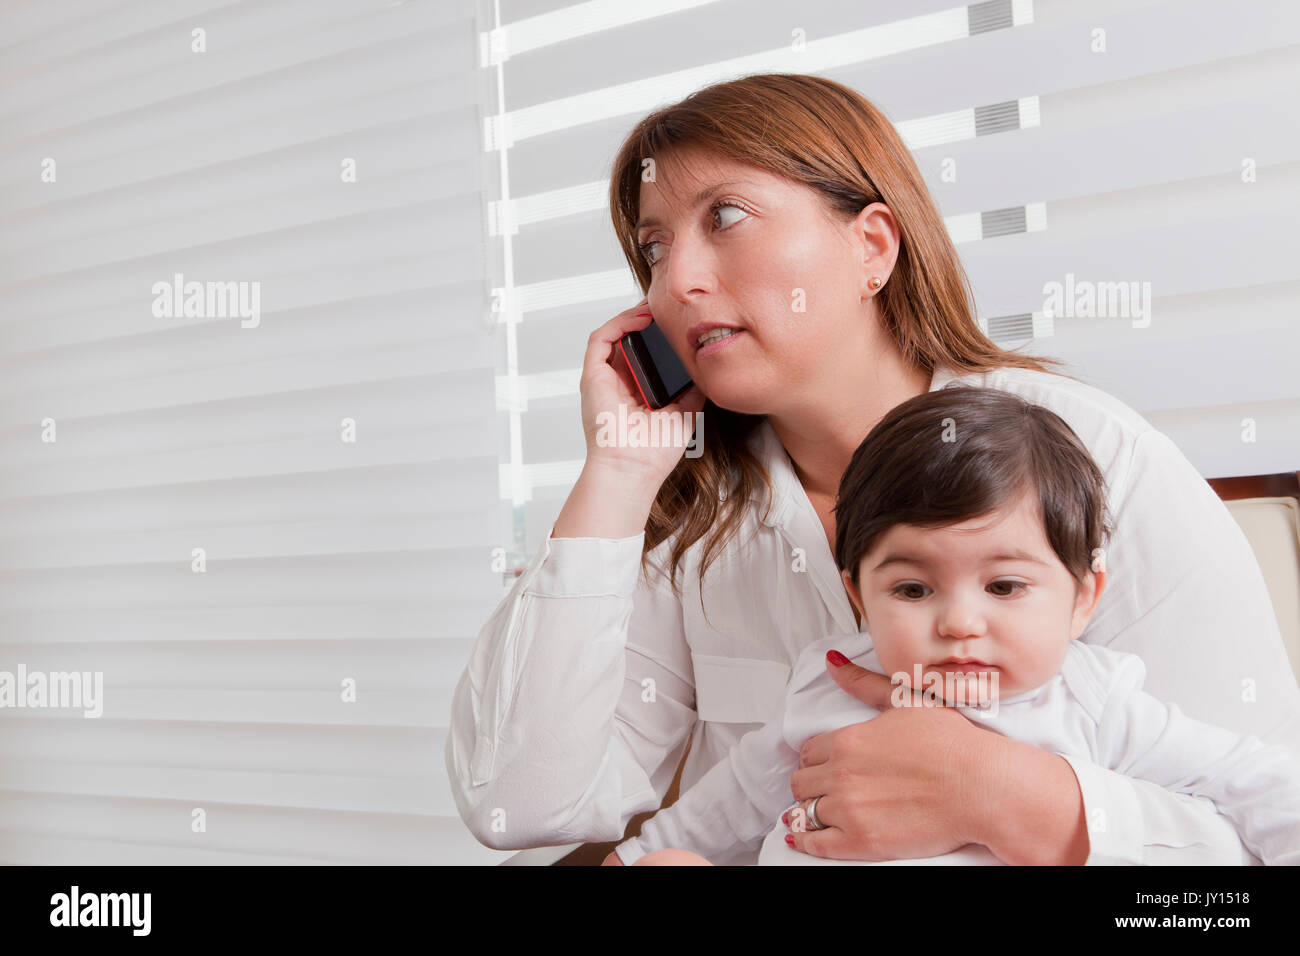 Hispanic mother holding baby boy and talking on cell phone Banque D'Images